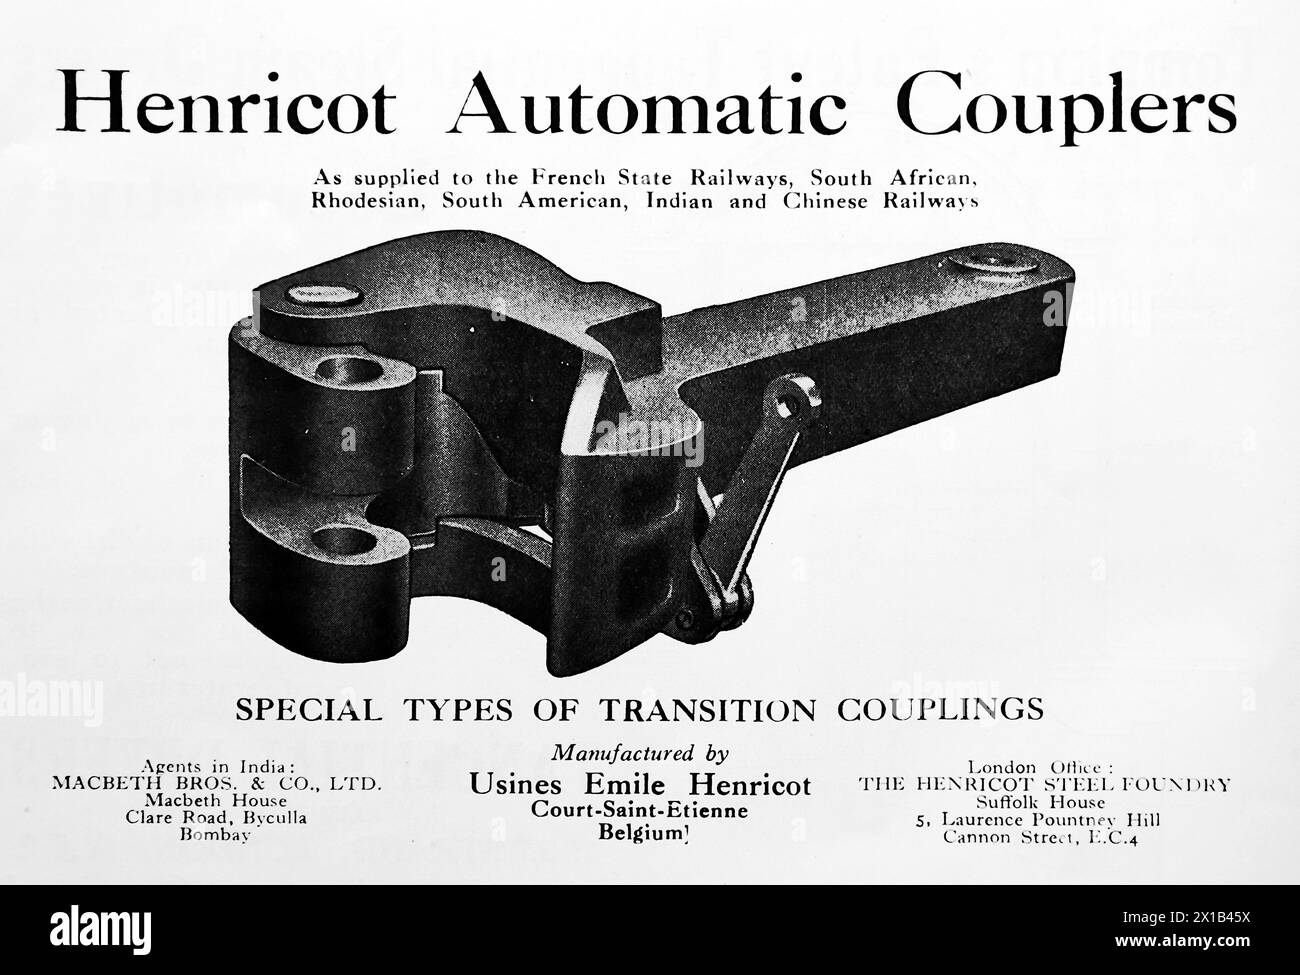 Advertisement for Usines Emile Henricot of Belgium which owned the Henricot Steel Foundry of Pountney Hill, London. Pictured is a Henricot Automatic Coupler. From an original publication dated 15 May 1924, this helps to give an insight into public transport, and the railways in particular, of the 1920s. Stock Photo